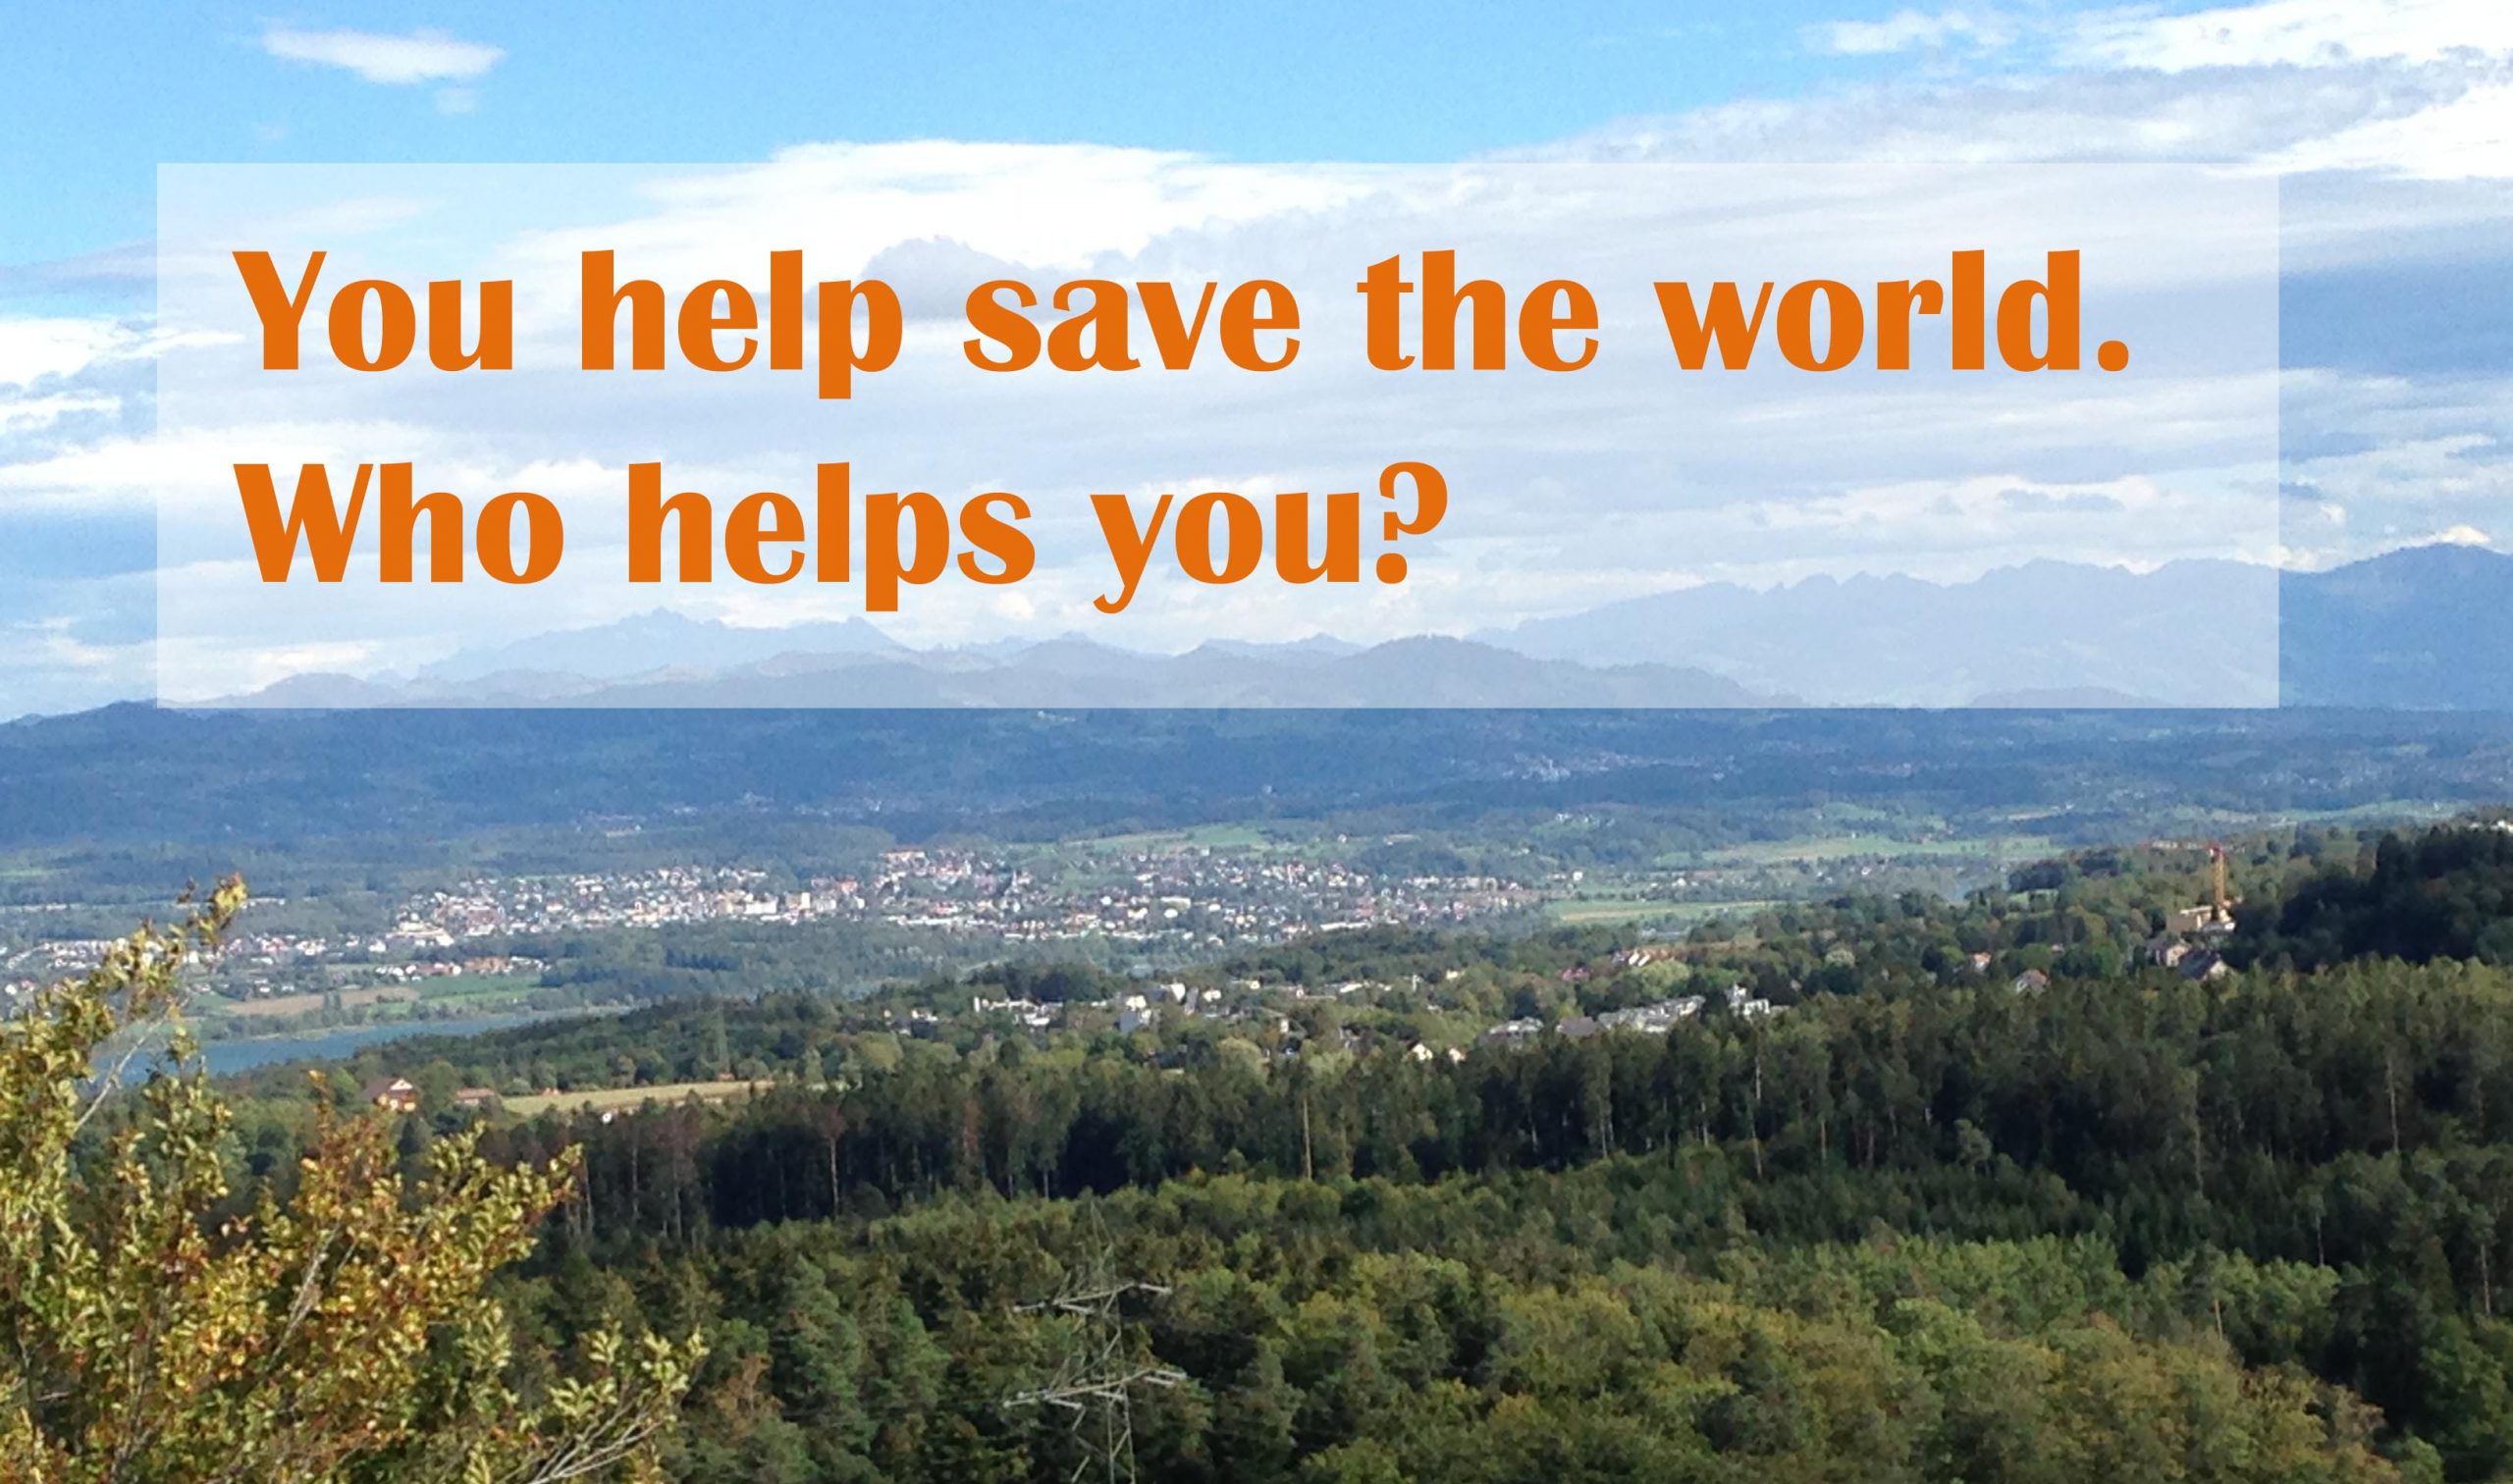 landscape trees, houses/town in distance, sky; tagline: You help save the world. Who helps you?